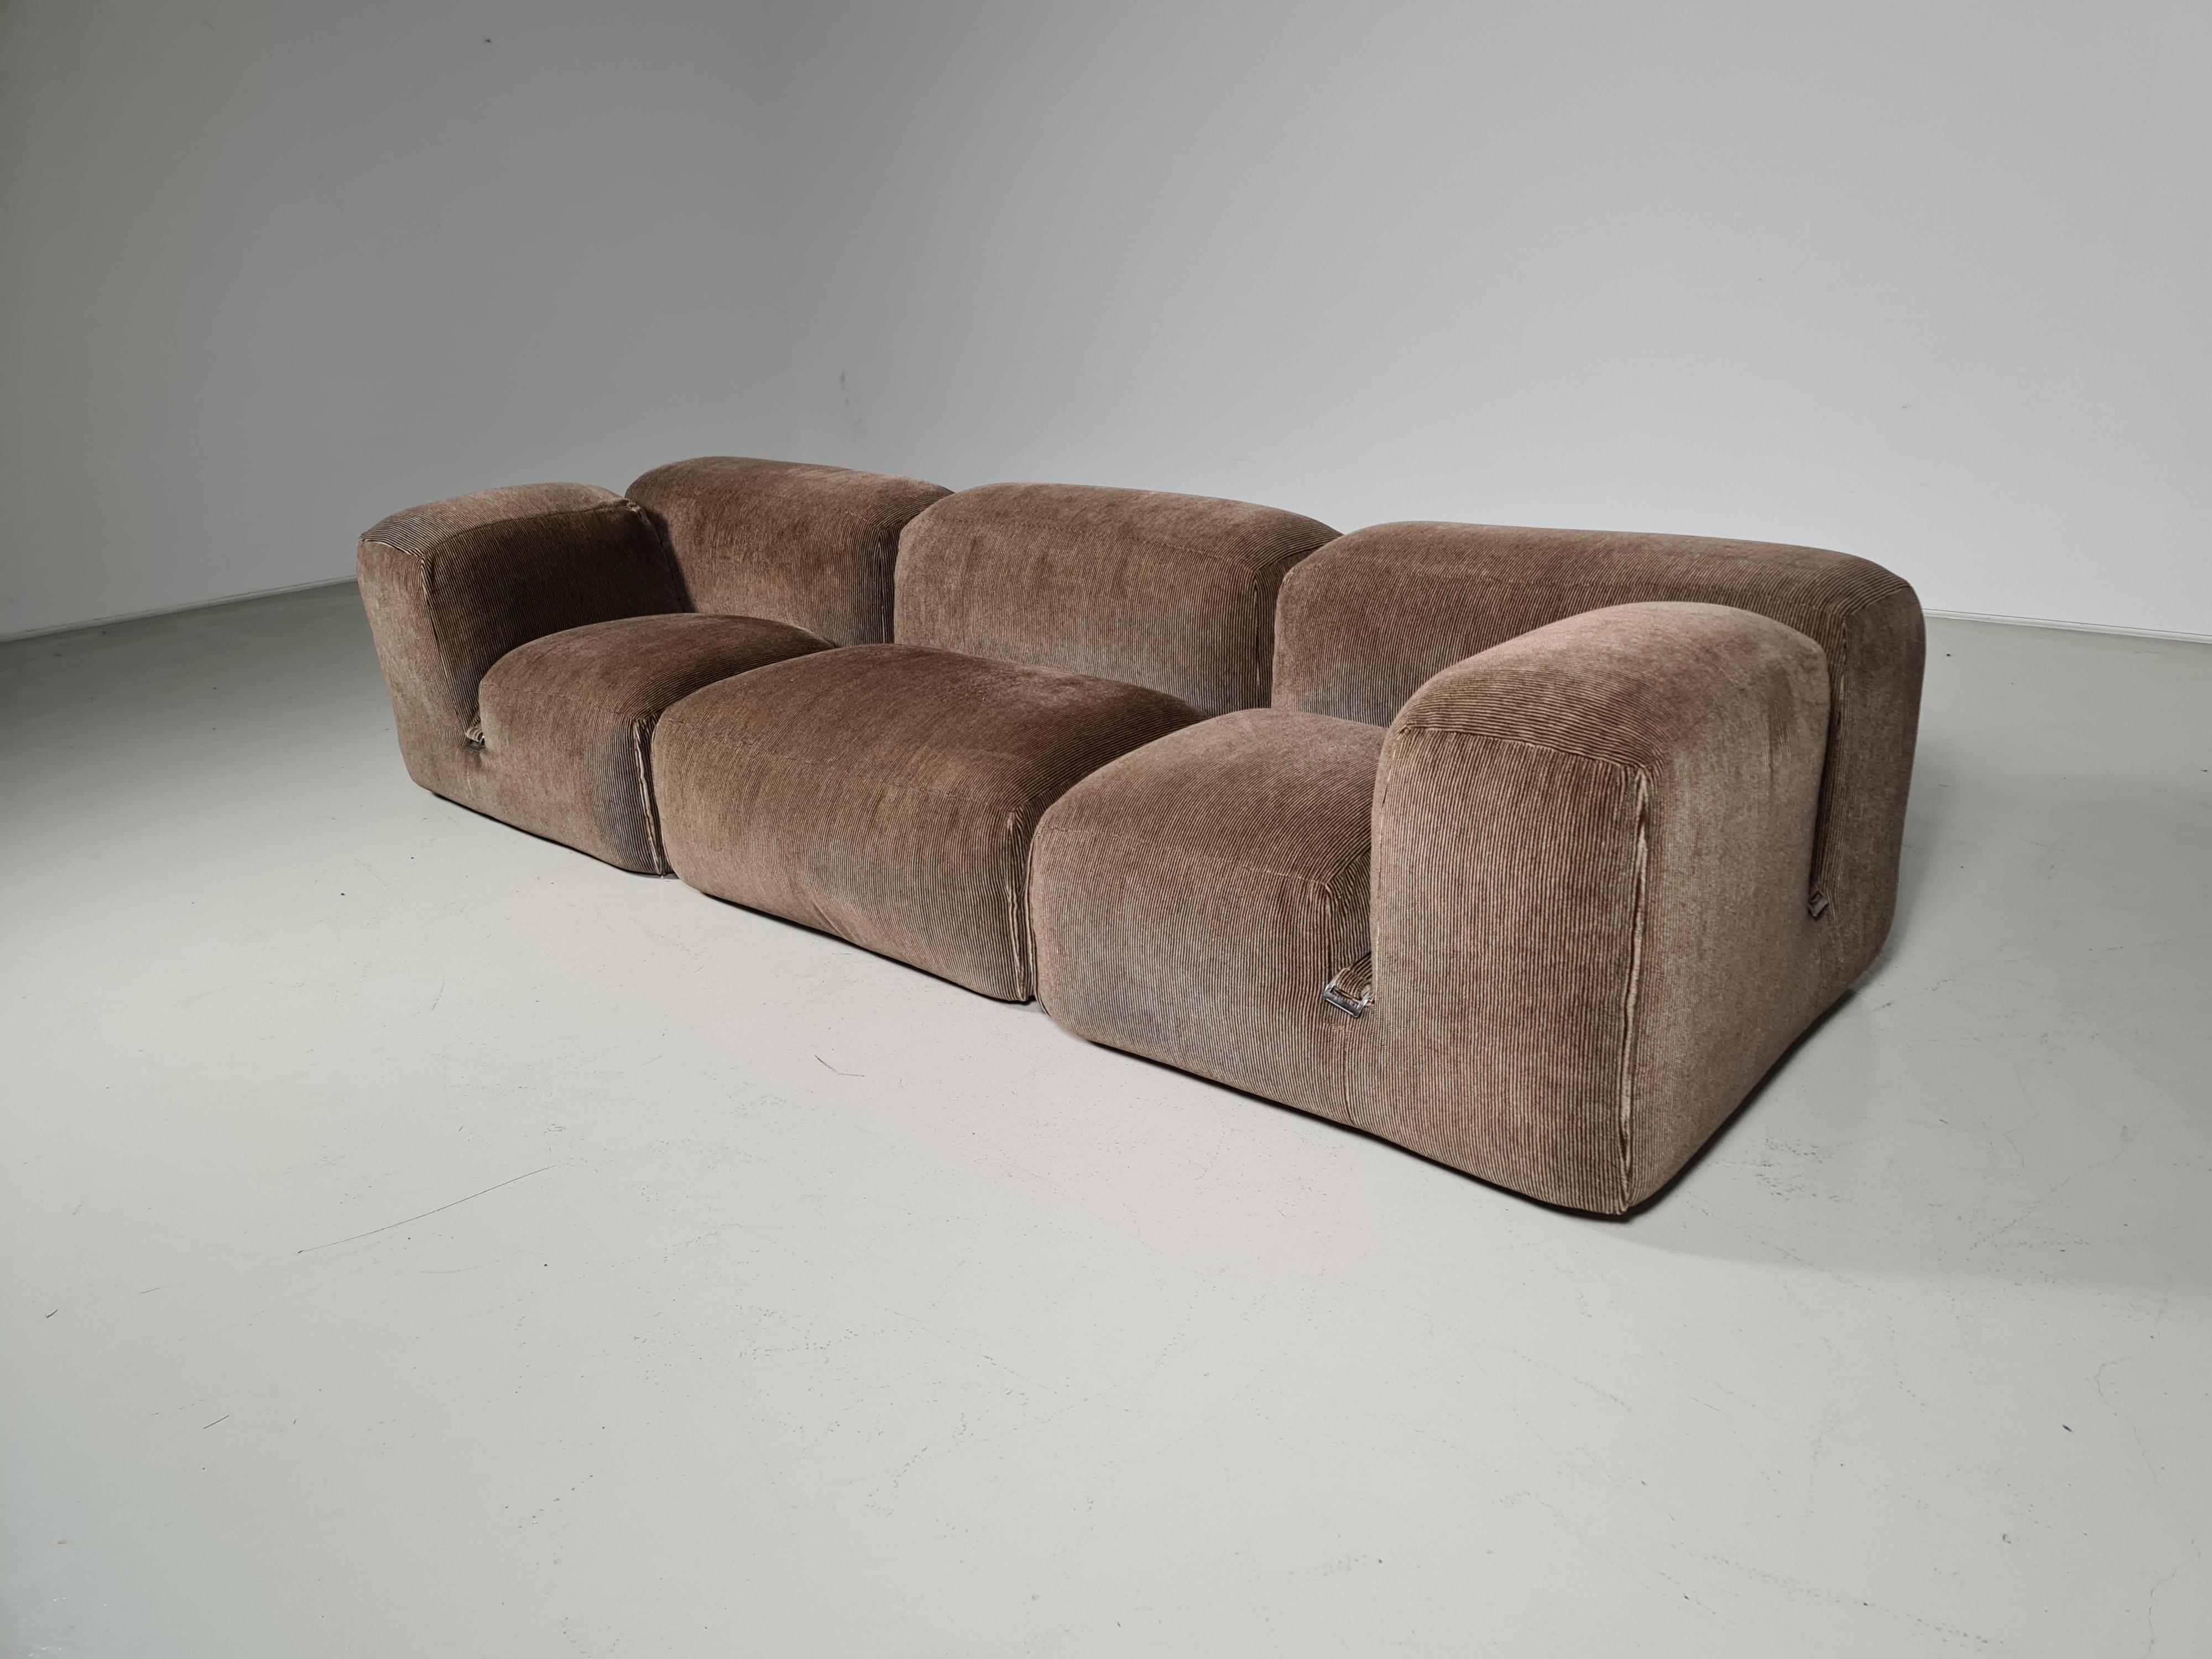 Exceptional and rare three-piece Le Mura sofa by Mario Bellini for Cassina, Italy, 1970s. The sofa still has the original Mohair velvet fabric. The three sections hook into each other with chrome metal buckles. This sofa was just for a limited time